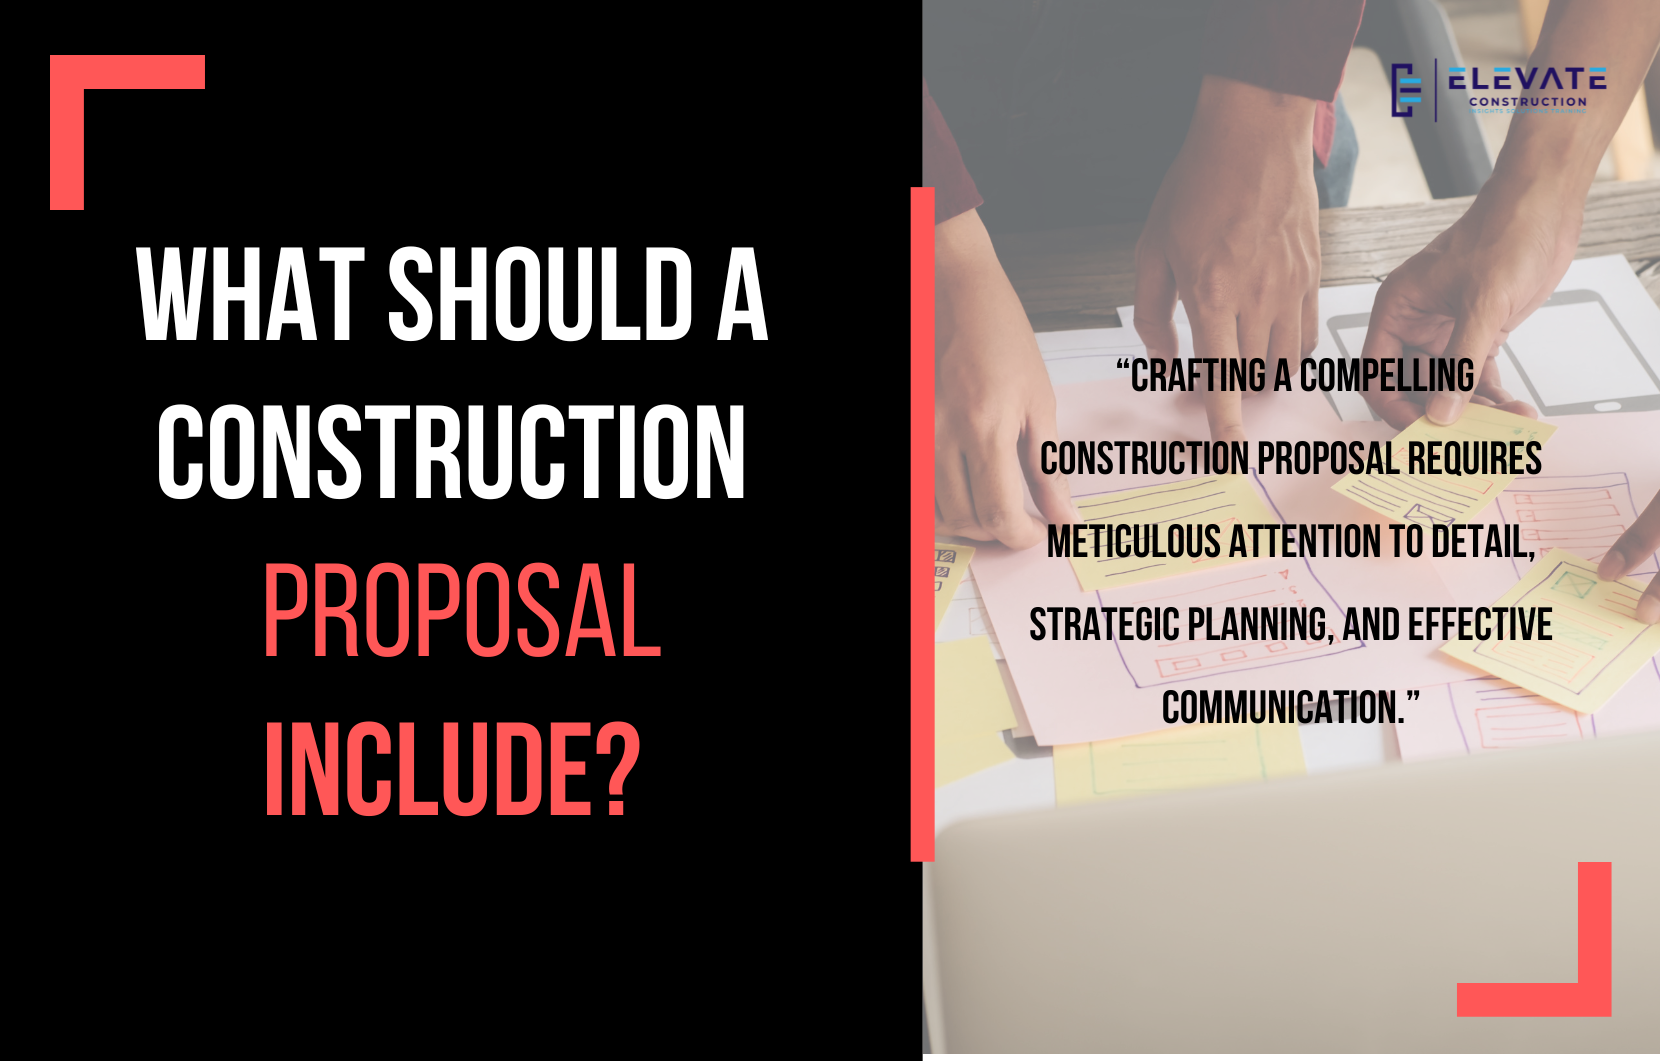 What Should A Construction Proposal Include?